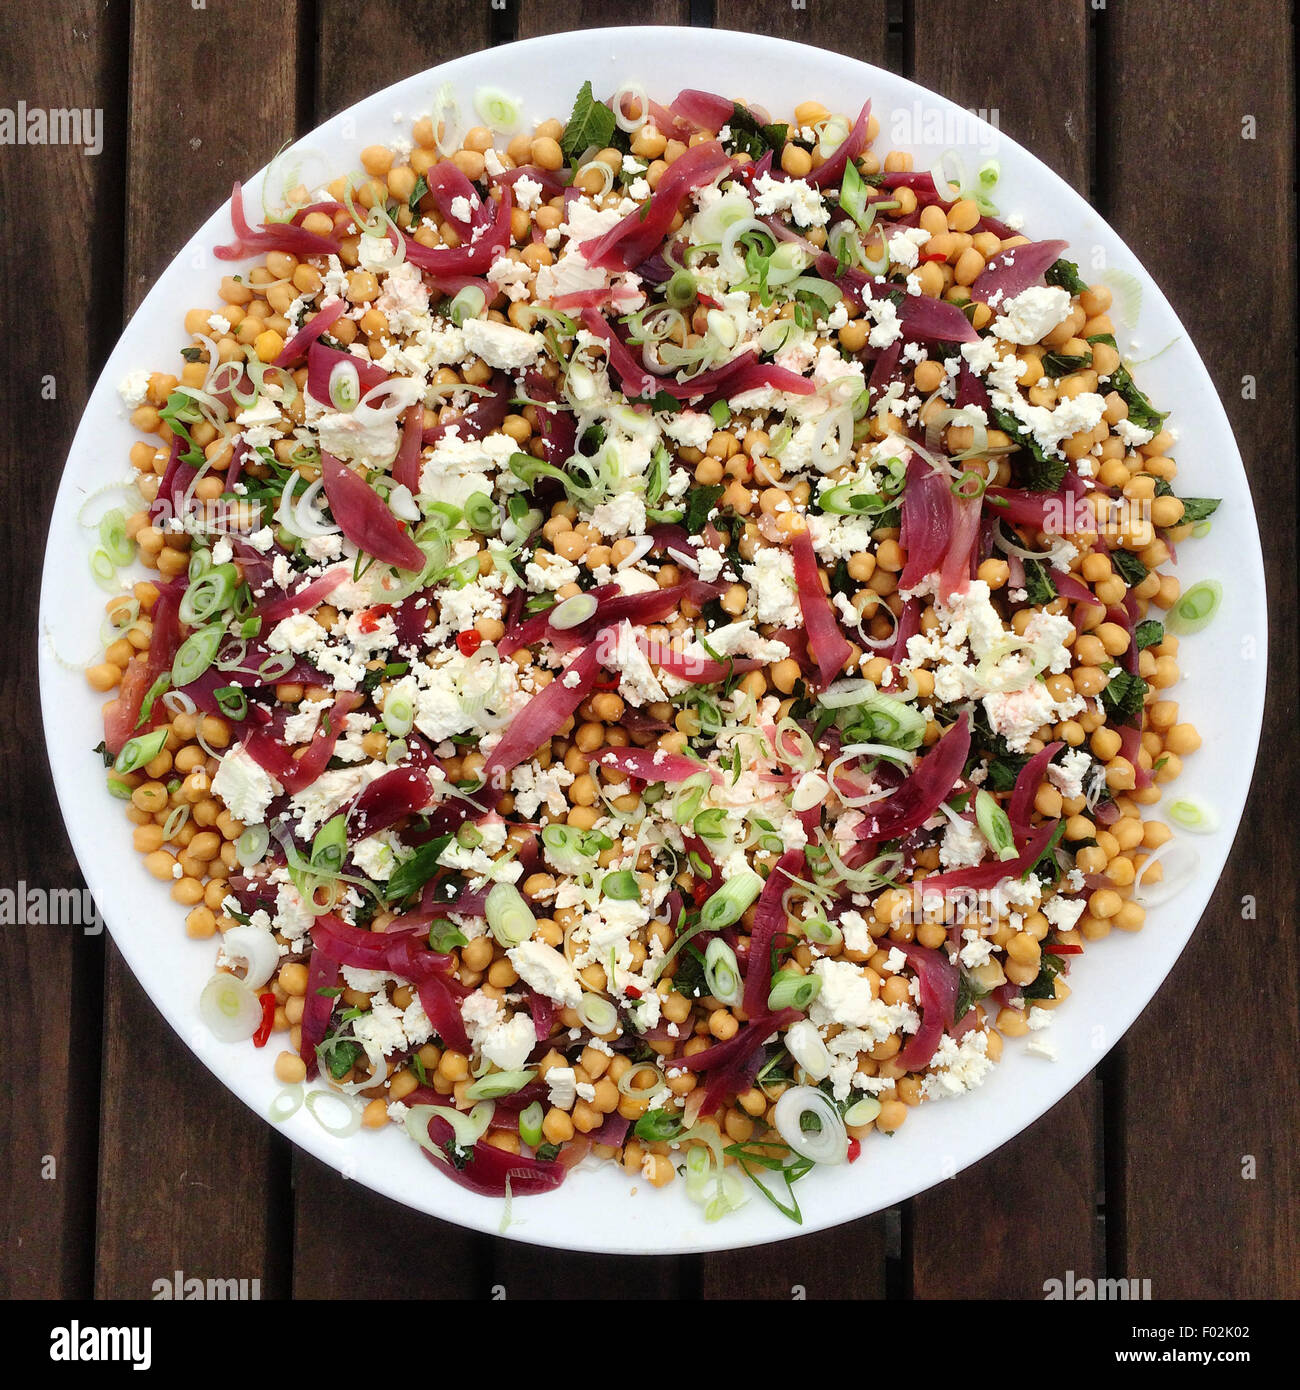 Salad with chickpeas, feta cheese and pickled onions Stock Photo